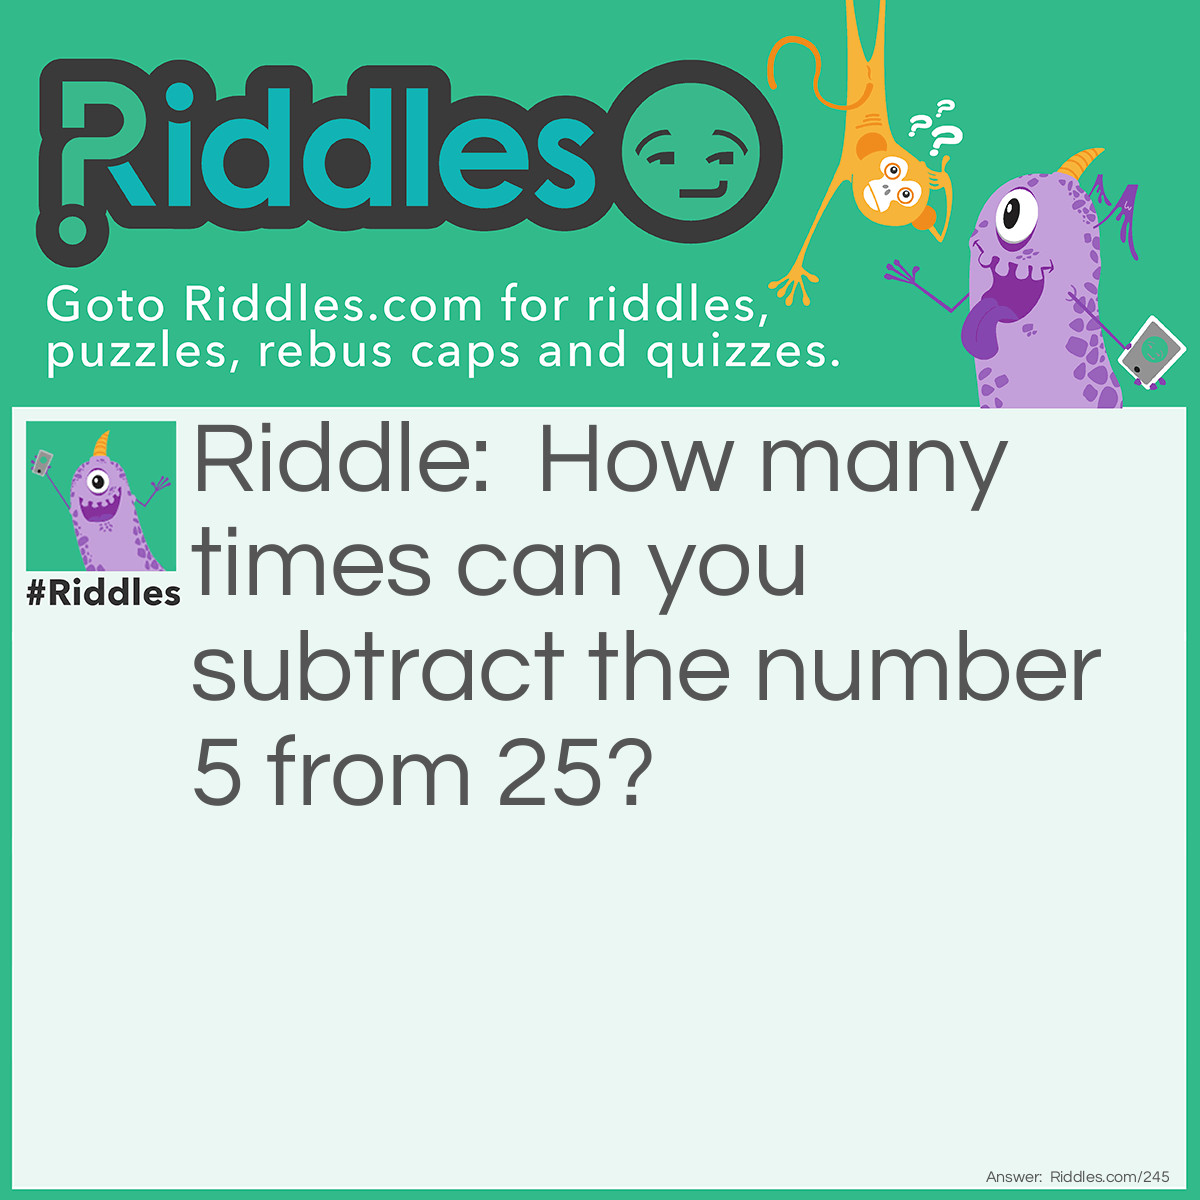 Riddle: How many times can you subtract the number 5 from 25? Answer: Only one time. After that, you would be subtracting from 20.